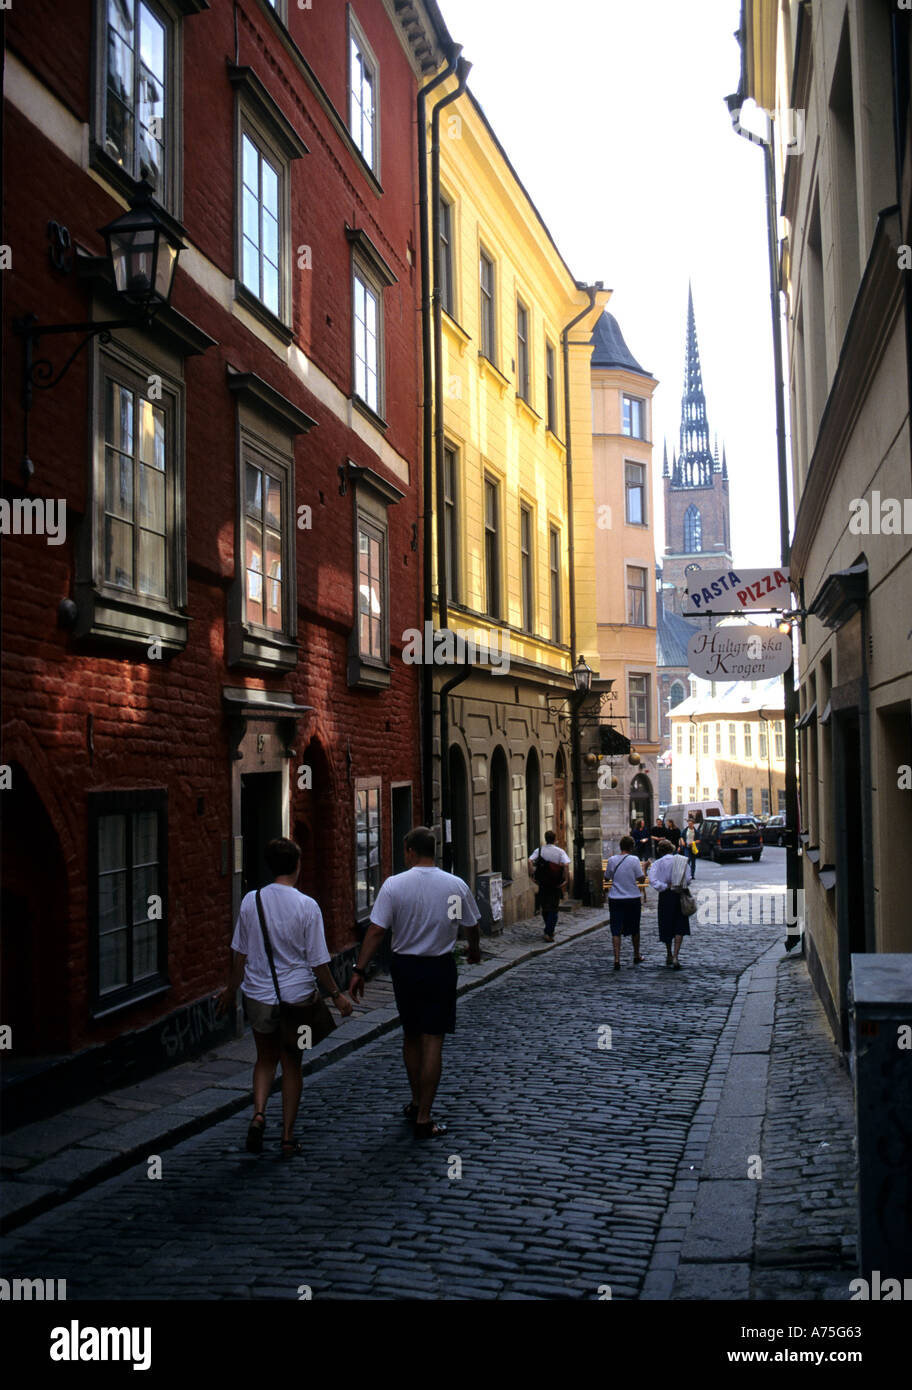 A Street in GAMAL STAN STOCKHOLM SWEDEN Stock Photo